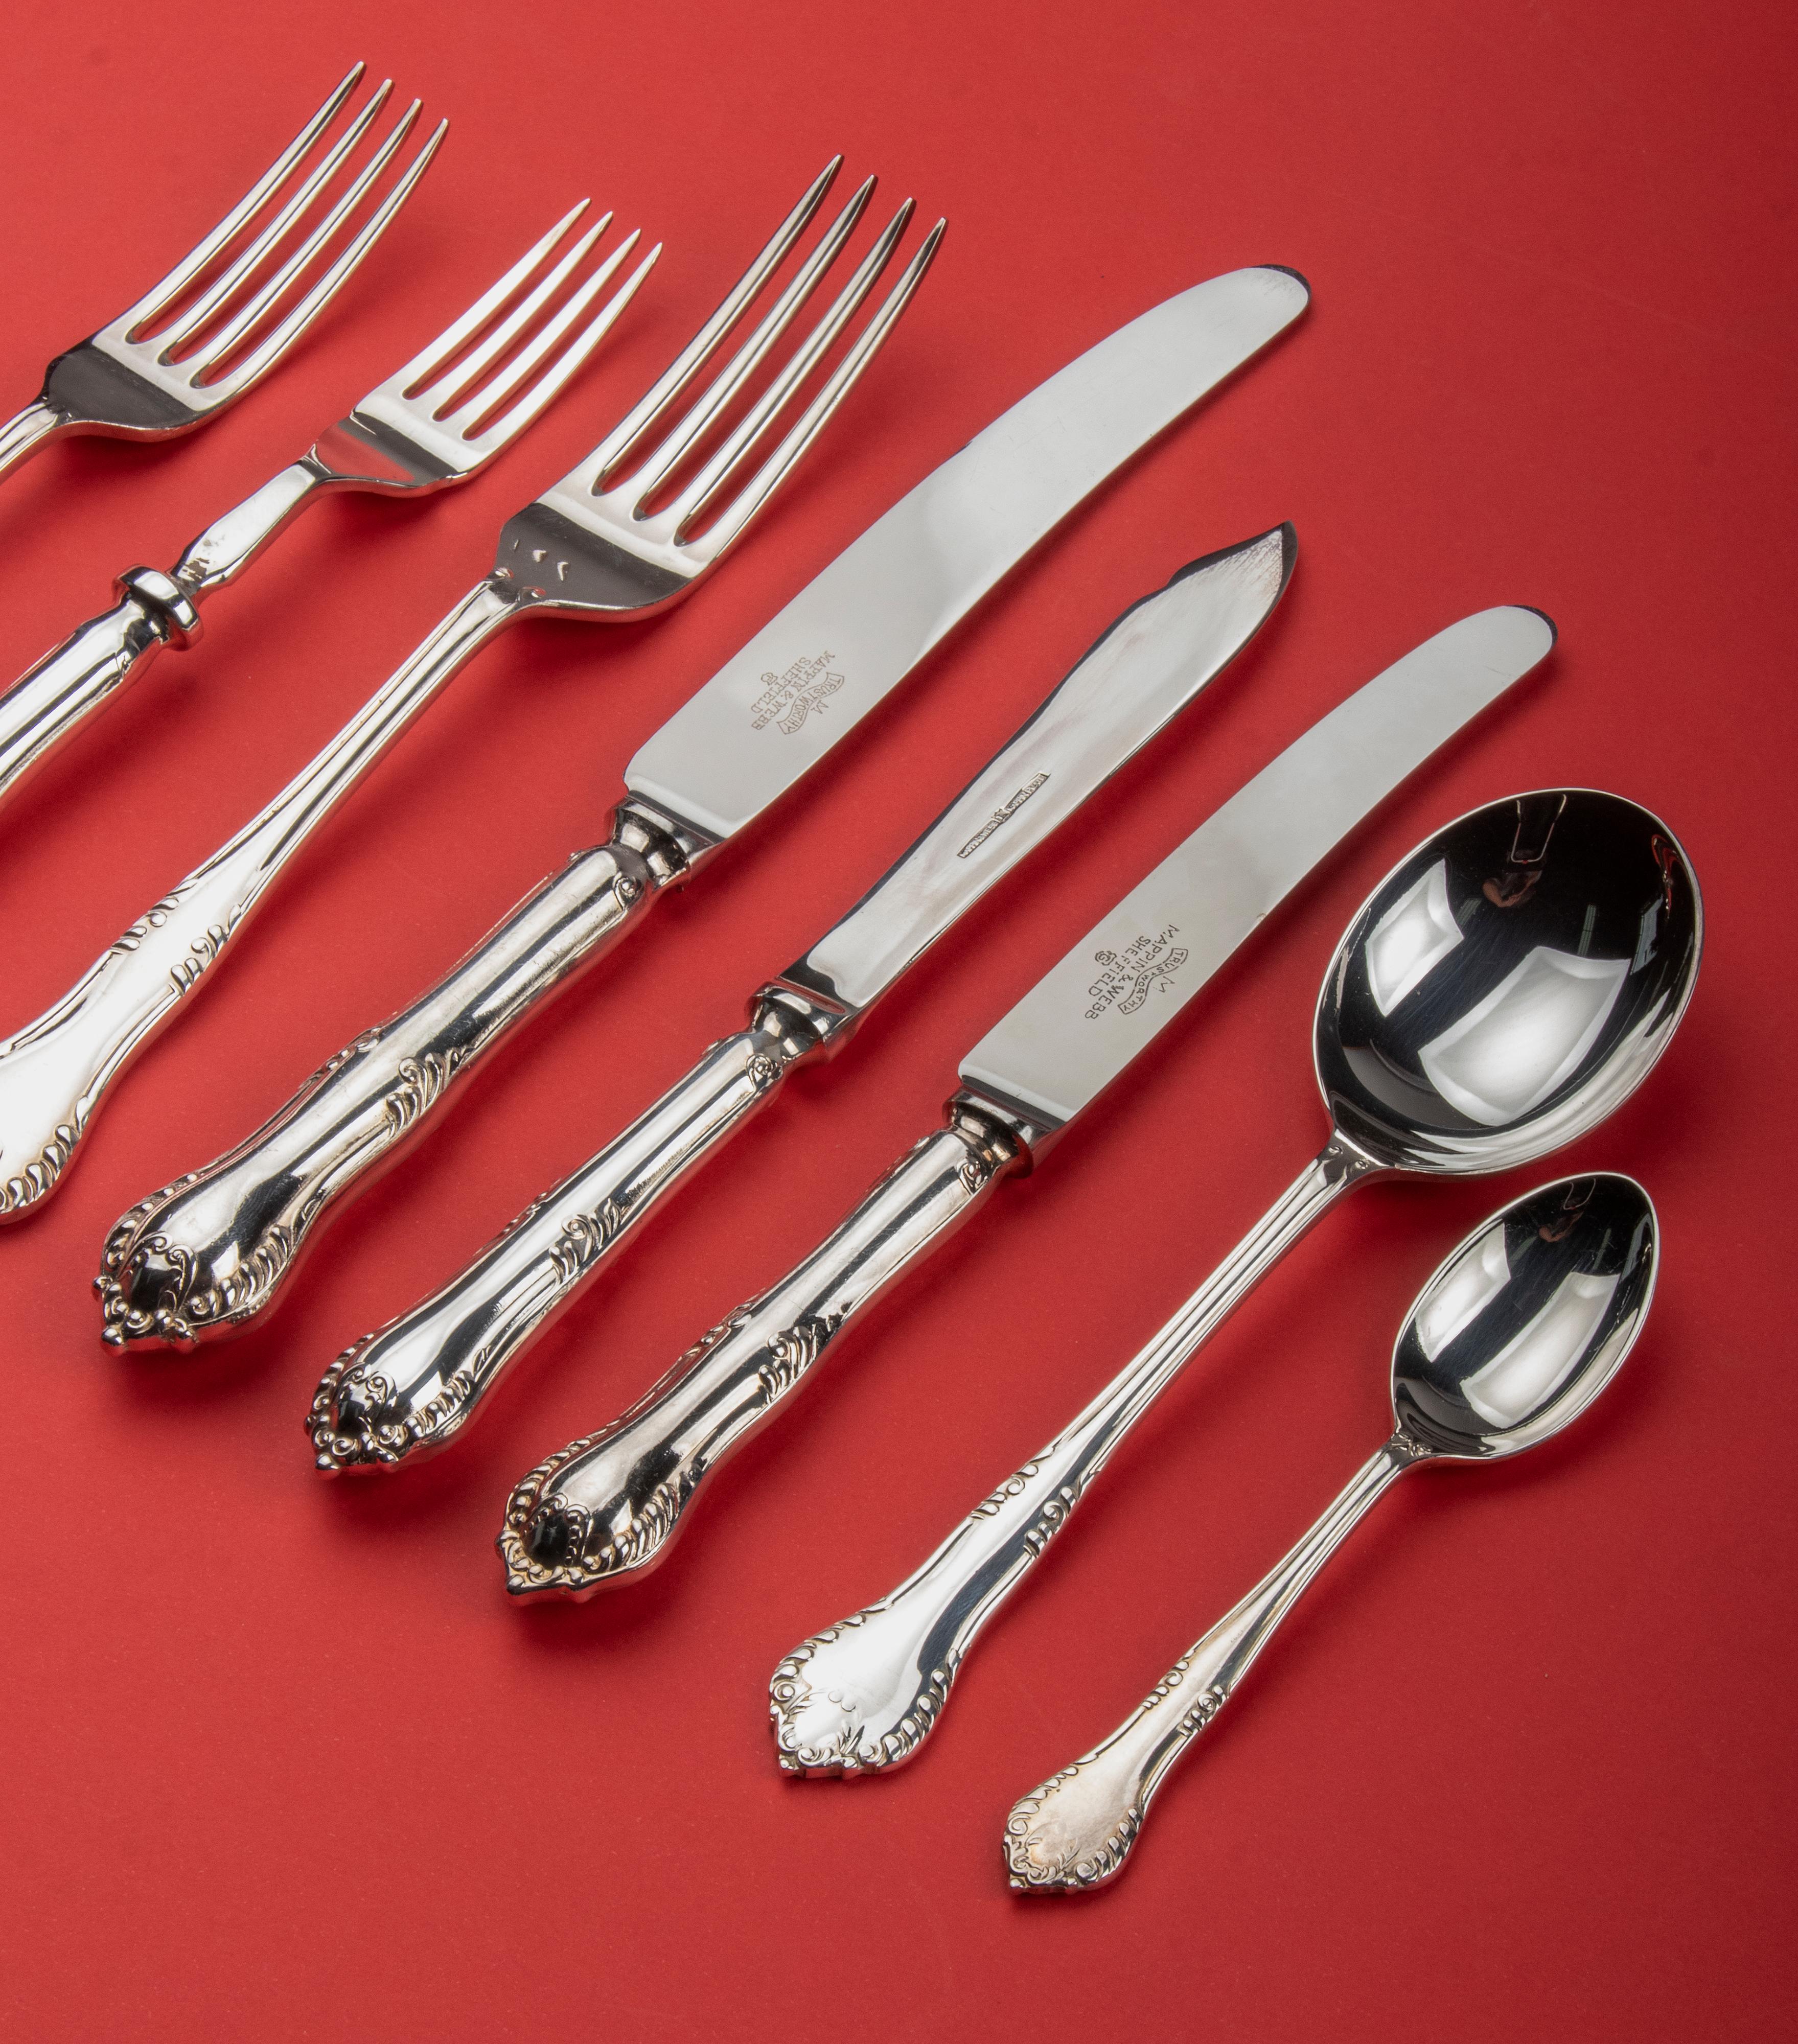 79-Piece Set of Silver Plated Flatware for 8 Persons by Mappin & Webb 2